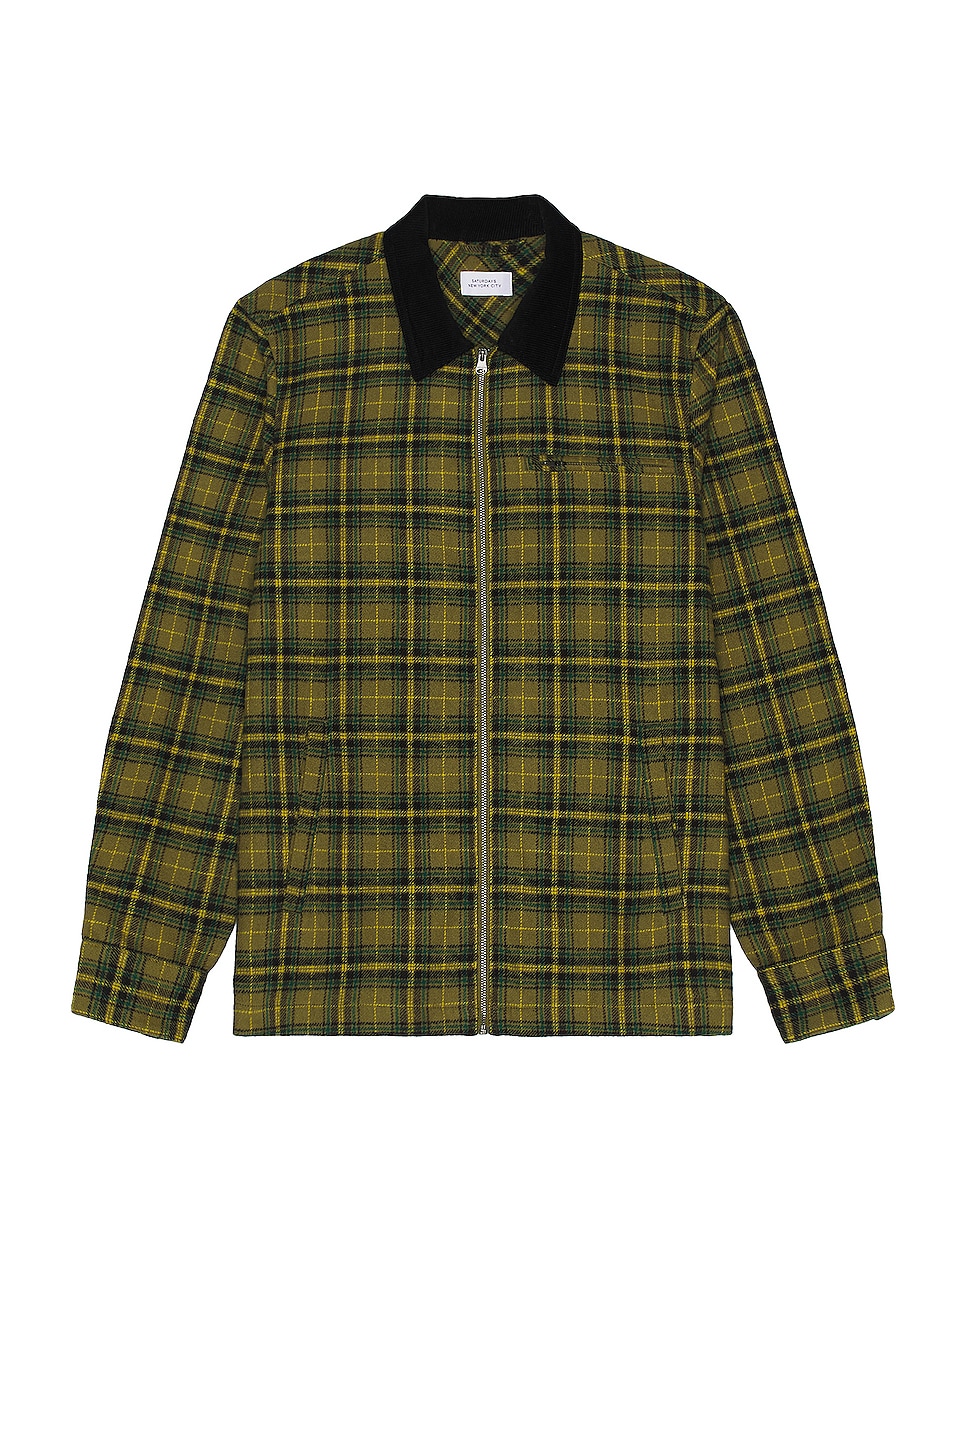 Image 1 of SATURDAYS NYC Ryan Zip Front Flannel Shirt in Mayfly